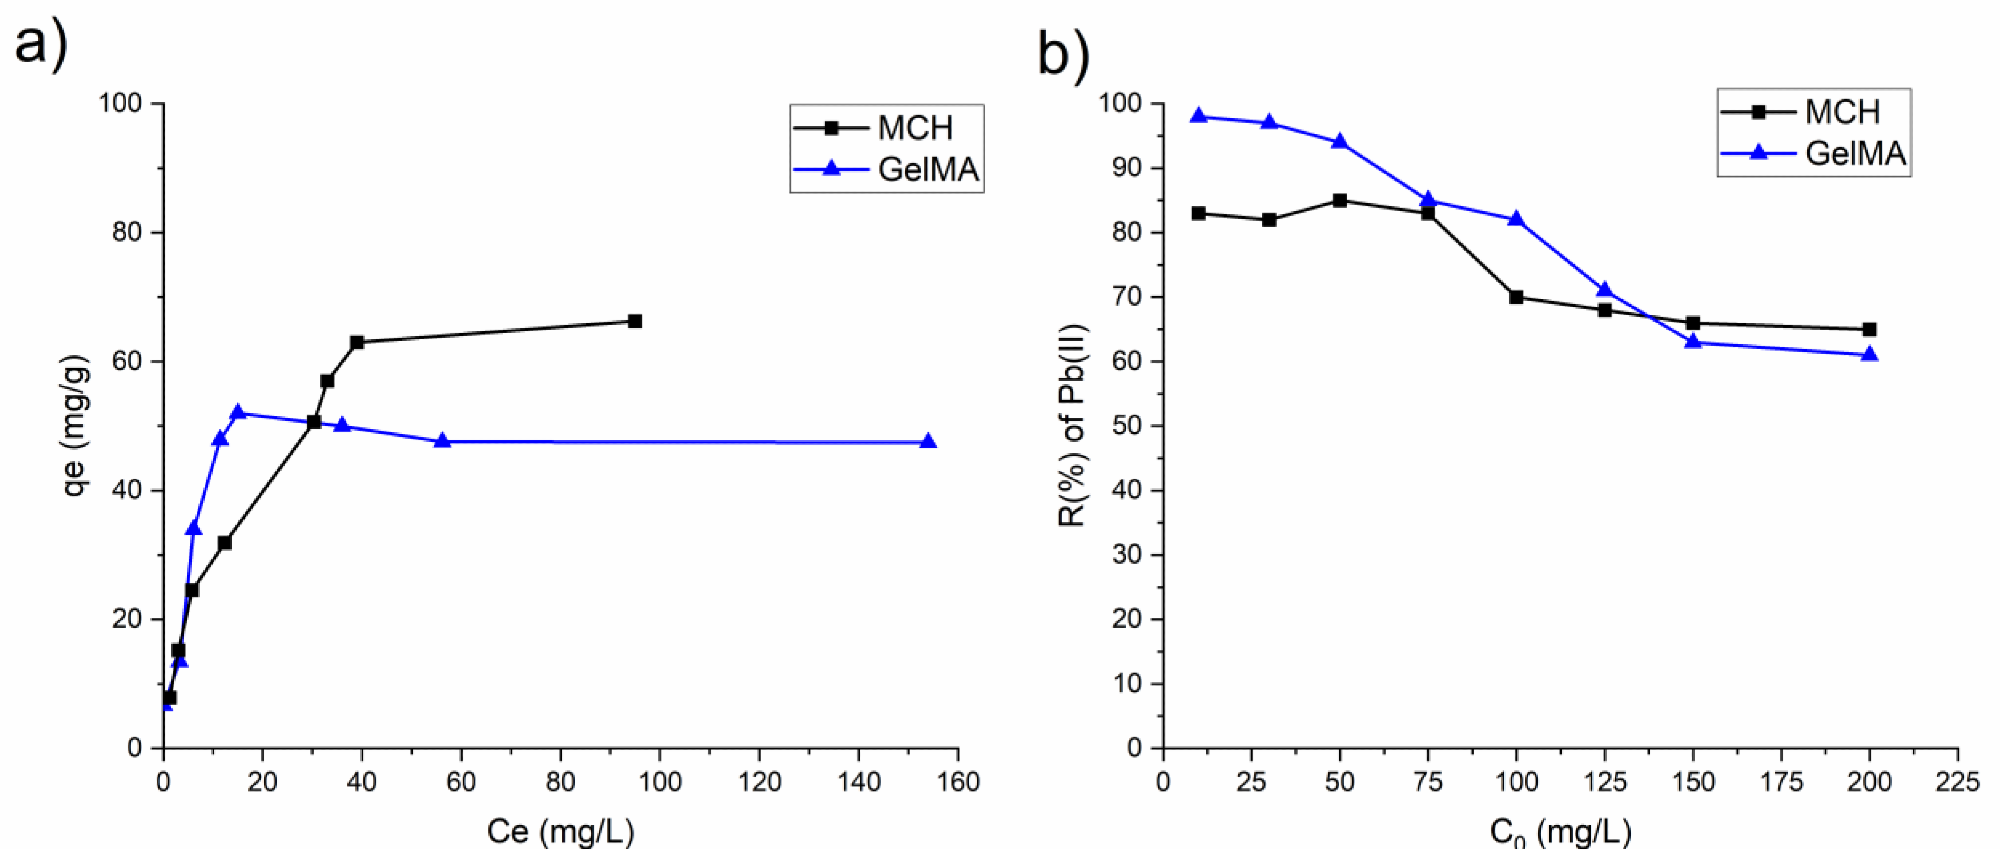 (a) Isotherm plots of MCH and GelMA hydrogels obtained from the experimental data; (b) removal percentage R(%) of Pb(II) by MCH and GelMA at different initial concentration.